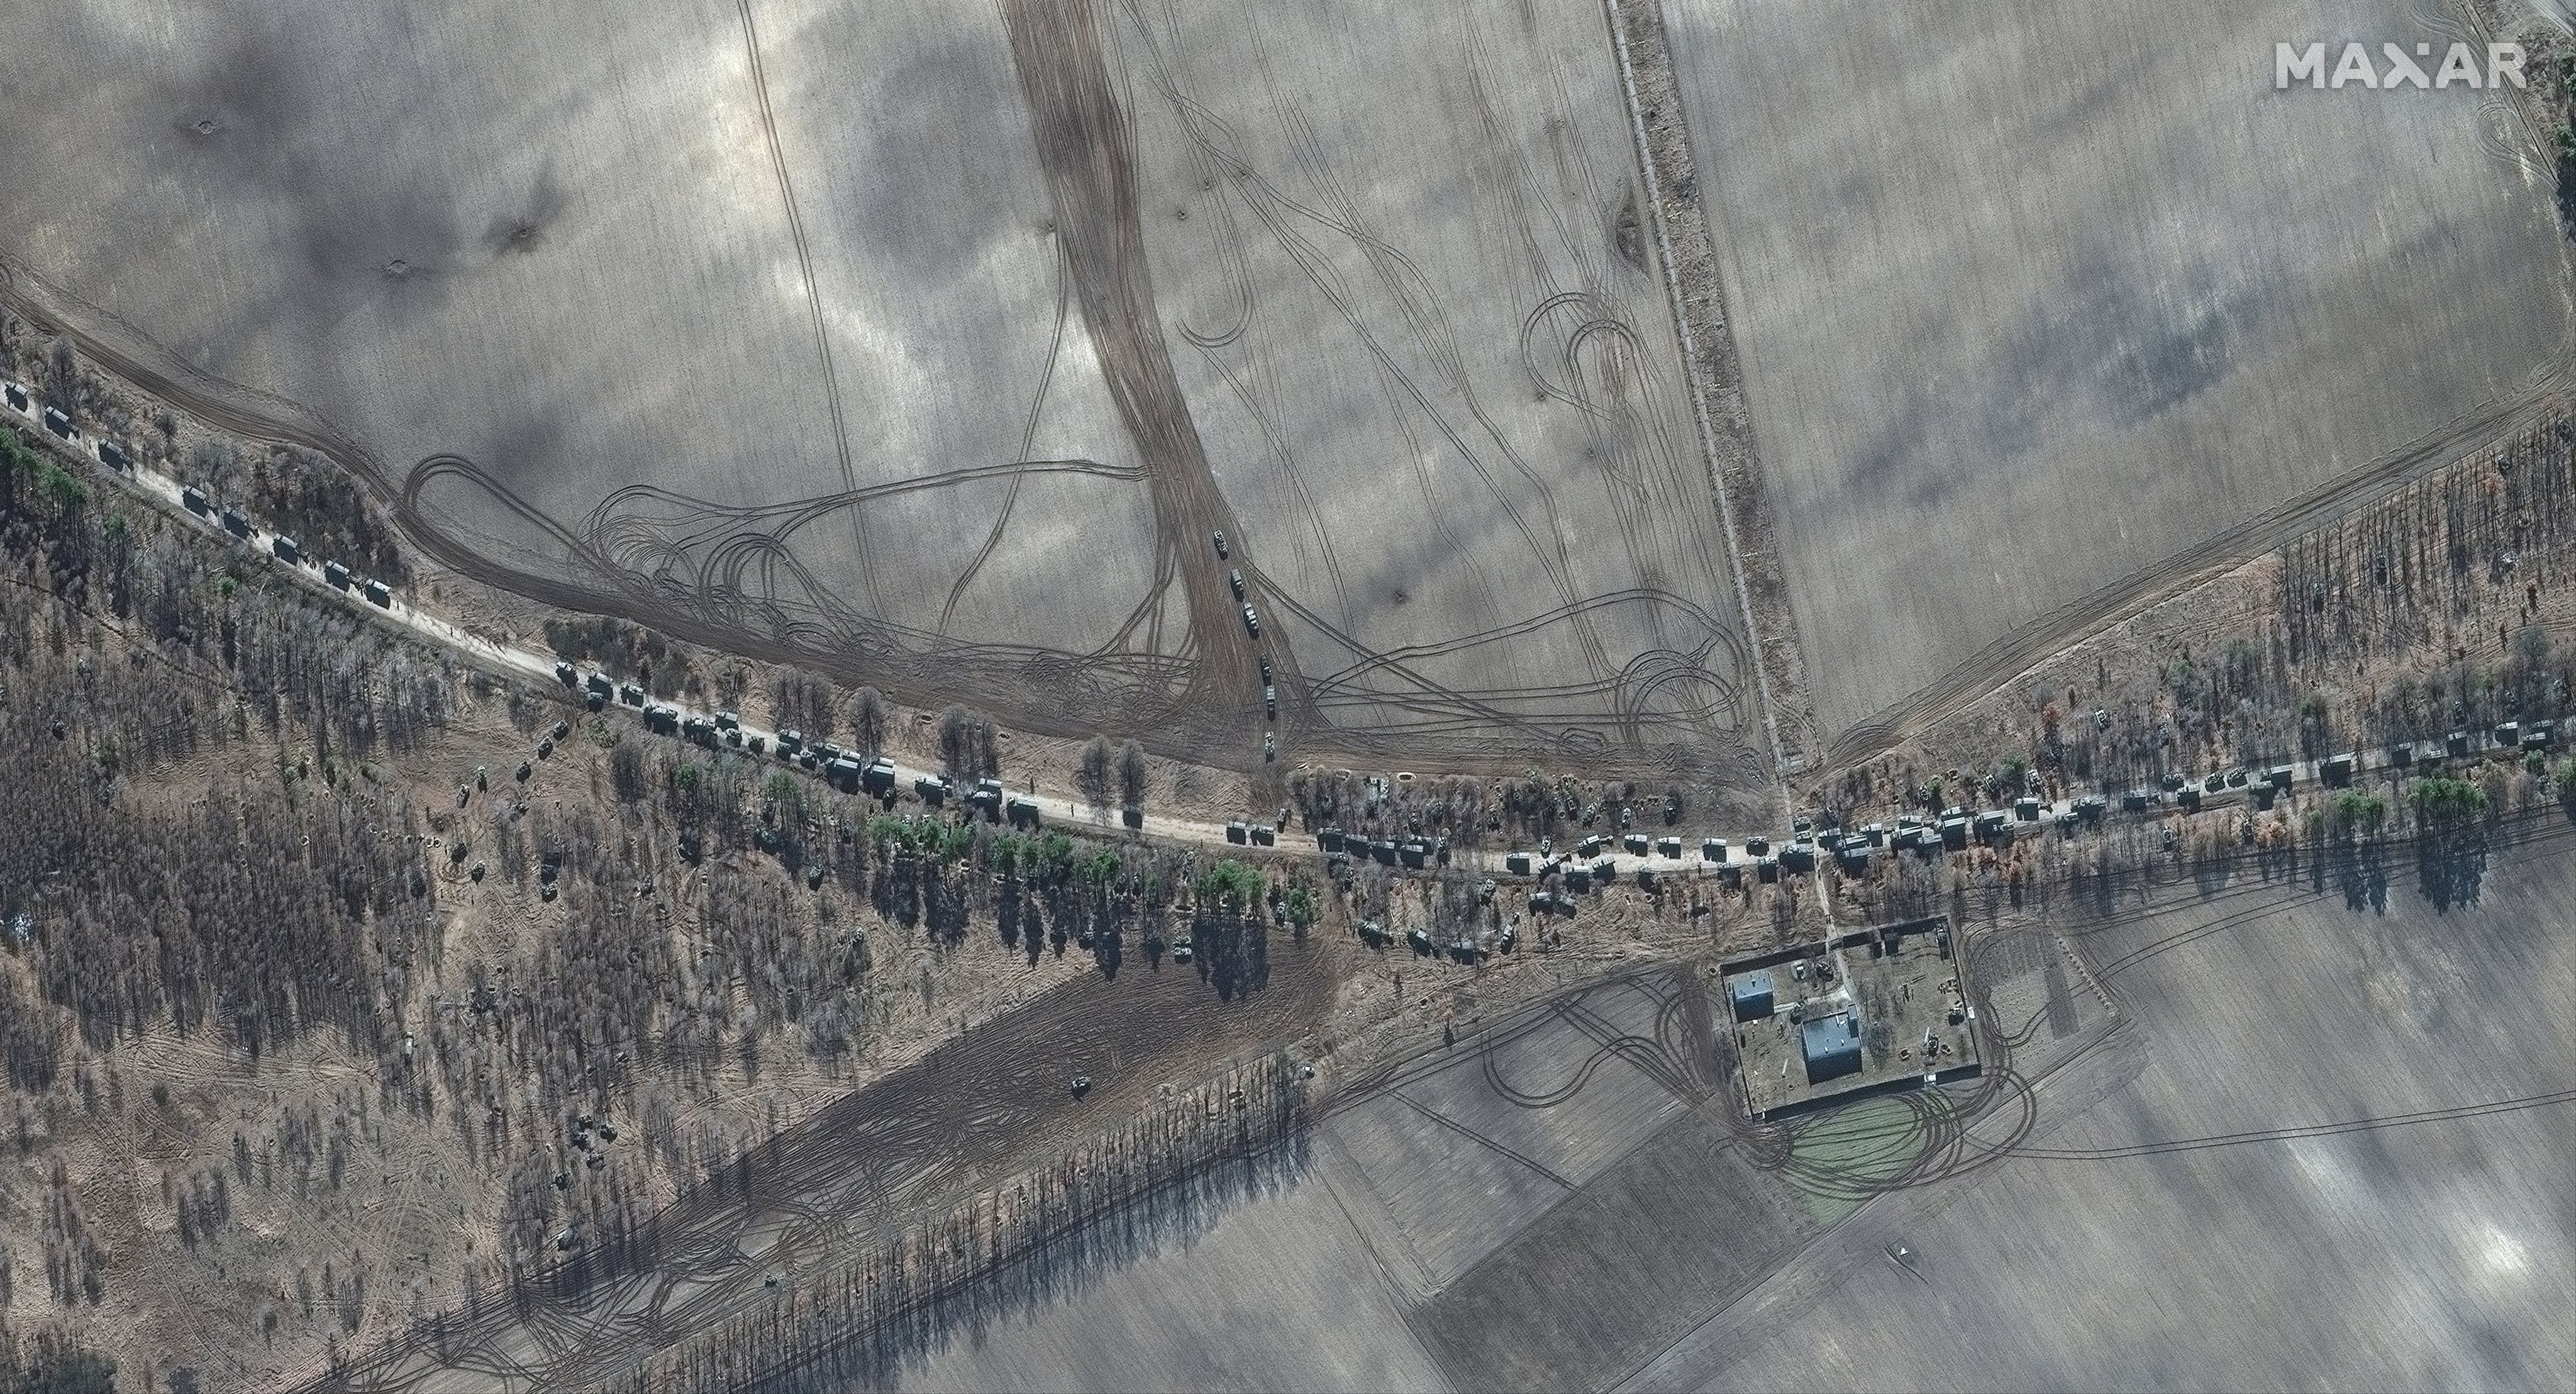 RUSSIANS INVADE UKRAINE -- FEBRUARY 28, 2022:  04 Maxar satellite imagery of southern end of large military convoy on the edge of Antonov Airport.  28feb2022_wv3.   Please use: Satellite image (c) 2022 Maxar Technologies.